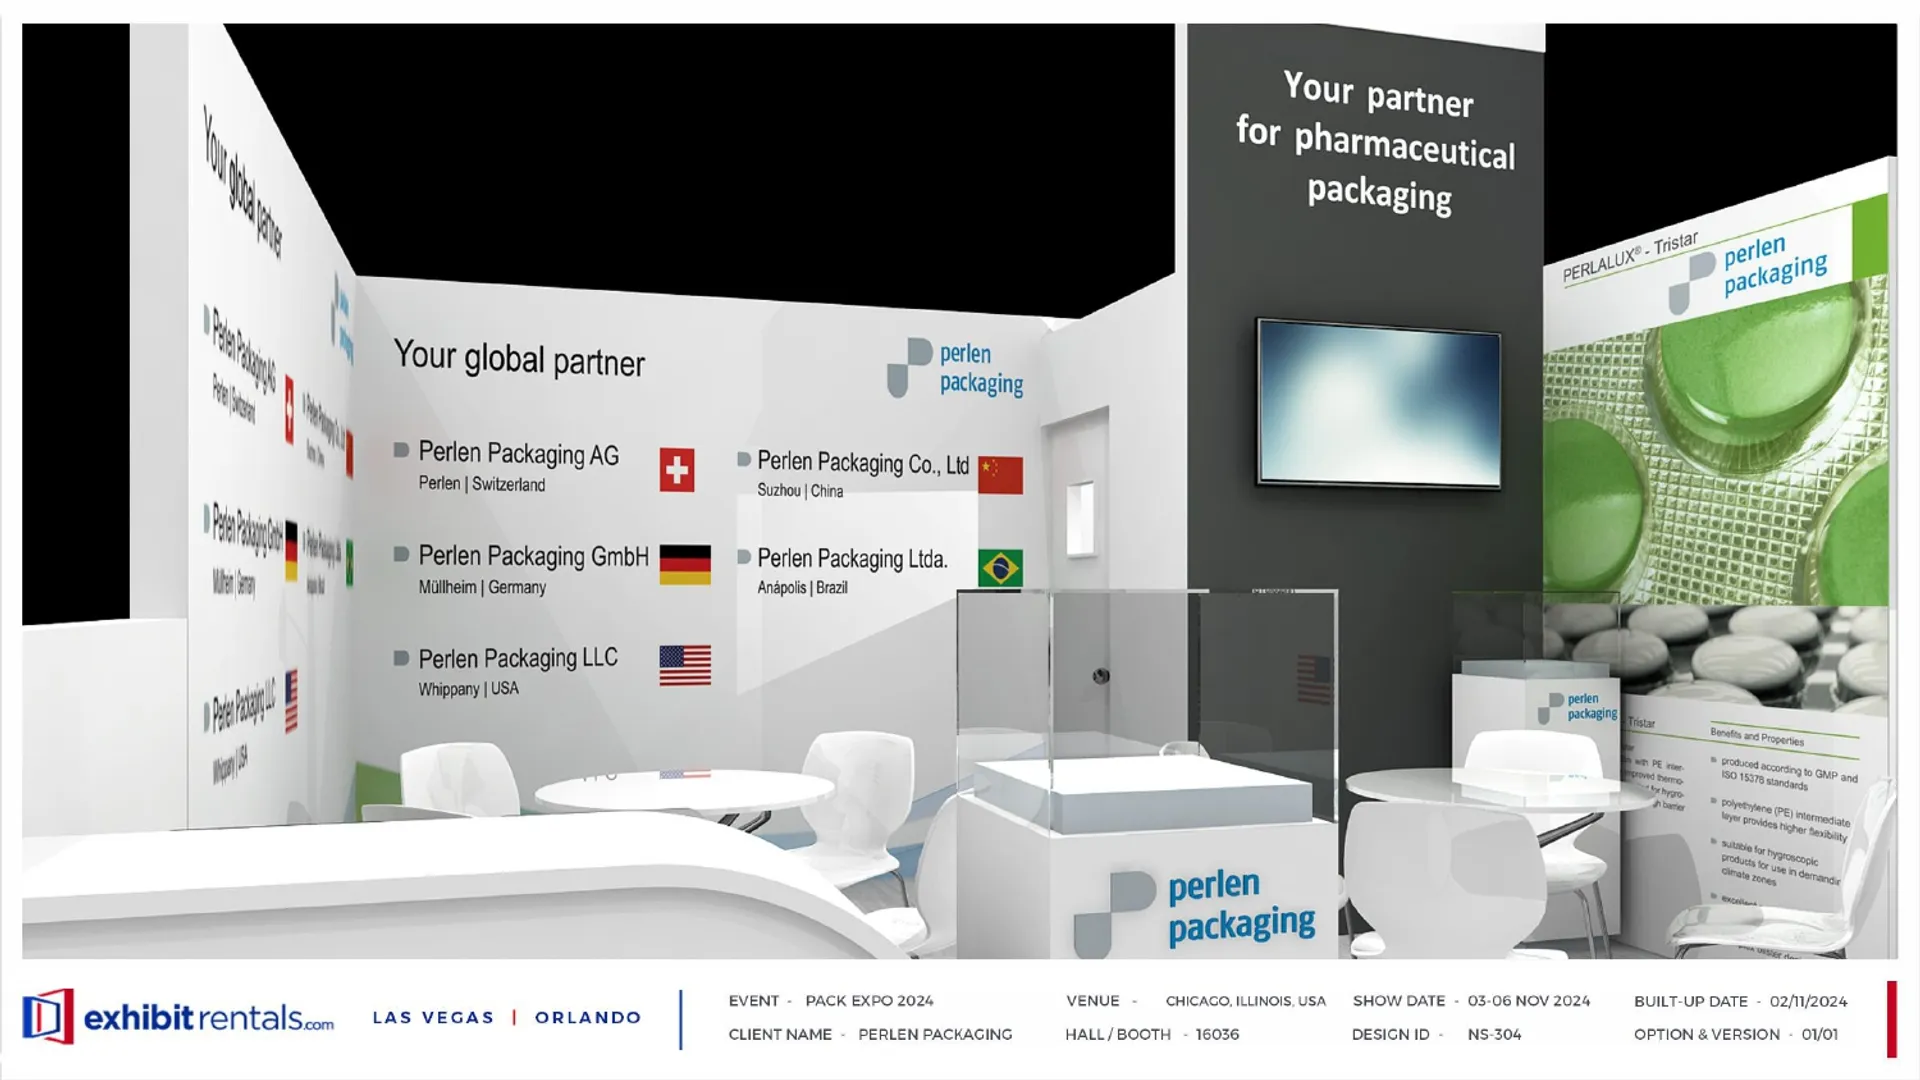 booth-design-projects/Exhibit-Rentals/2024-04-18-15x15-PENINSULA-Project-104/Perlen Packaging Pack Expo - Design Presentation.pptx-15_page-0001-rot45d.jpg